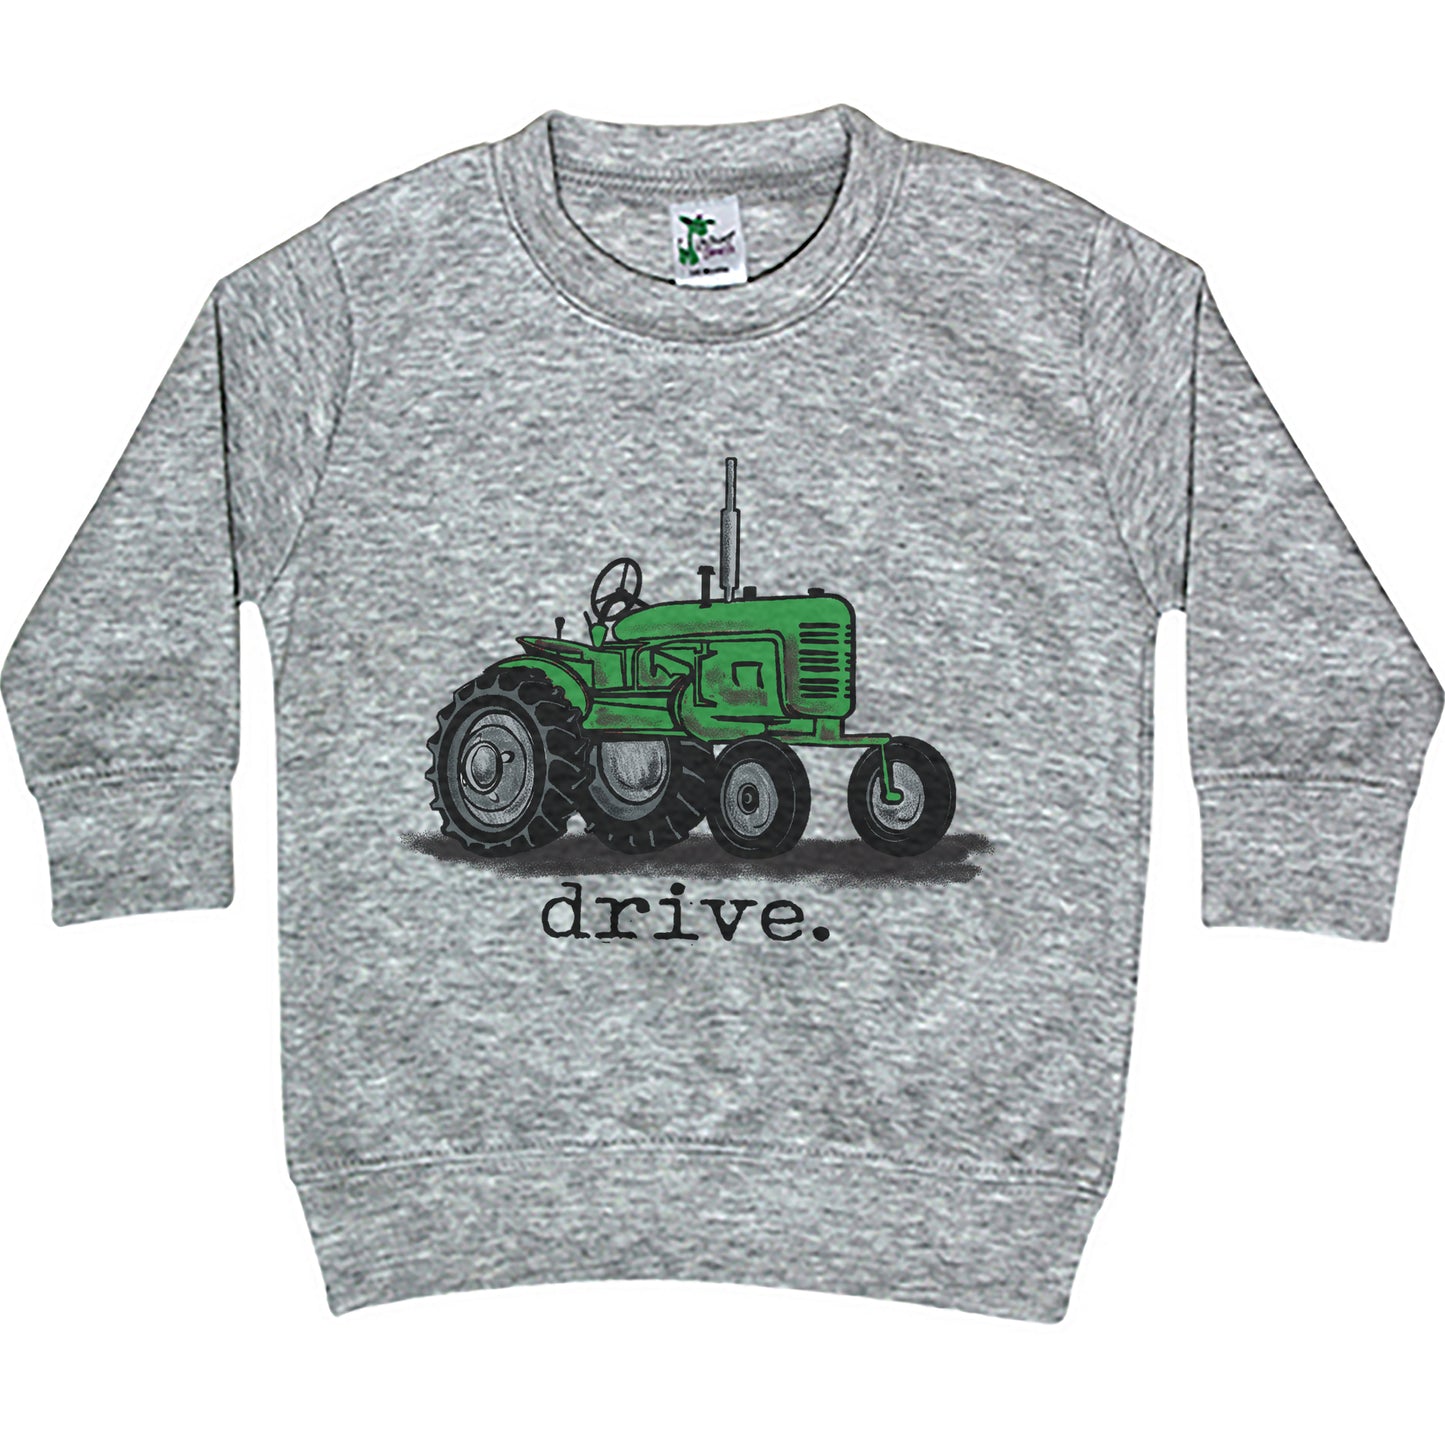 "Drive" Green Tractor Toddler/Youth Long Sleeve shirt